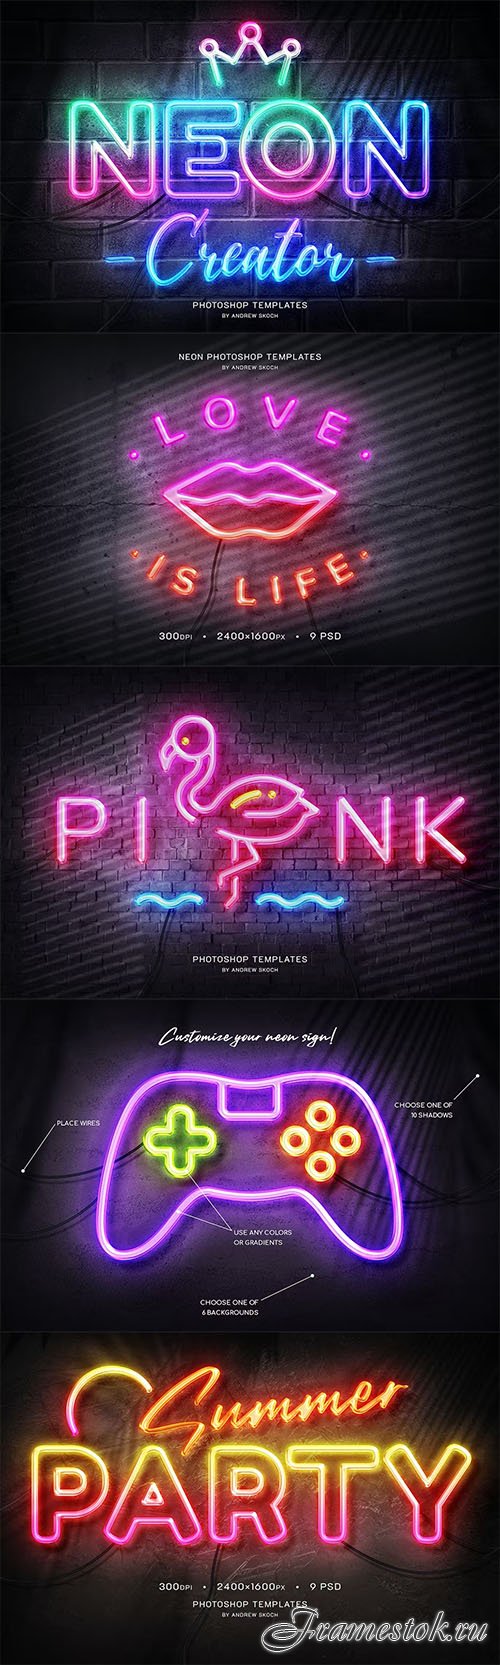 Neon Wall Sign Templates PSD